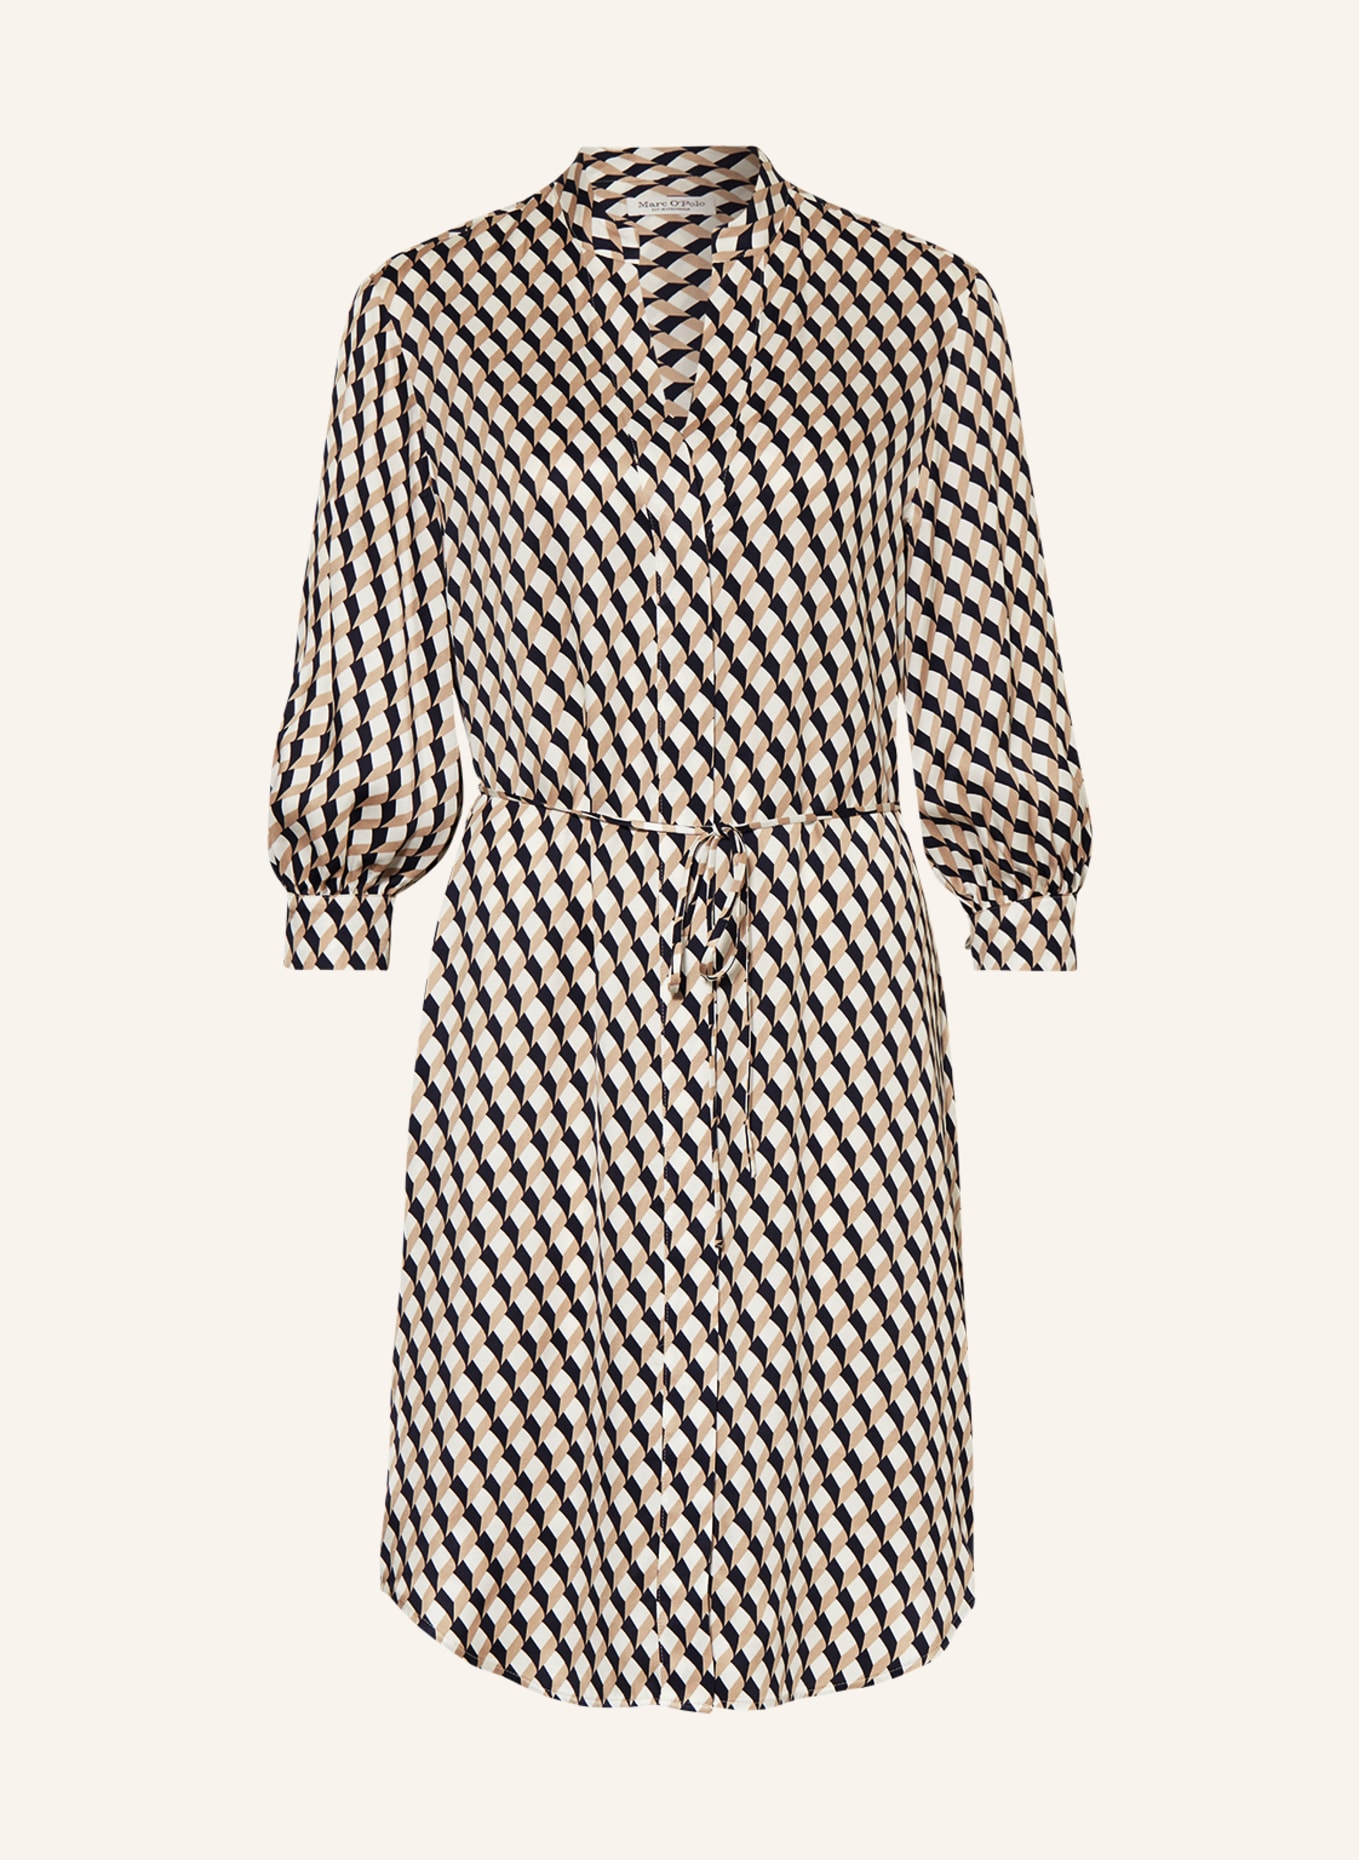 Marc O'Polo Shirt dress with 3/4 sleeves, Color: DARK BLUE/ WHITE/ BEIGE (Image 1)